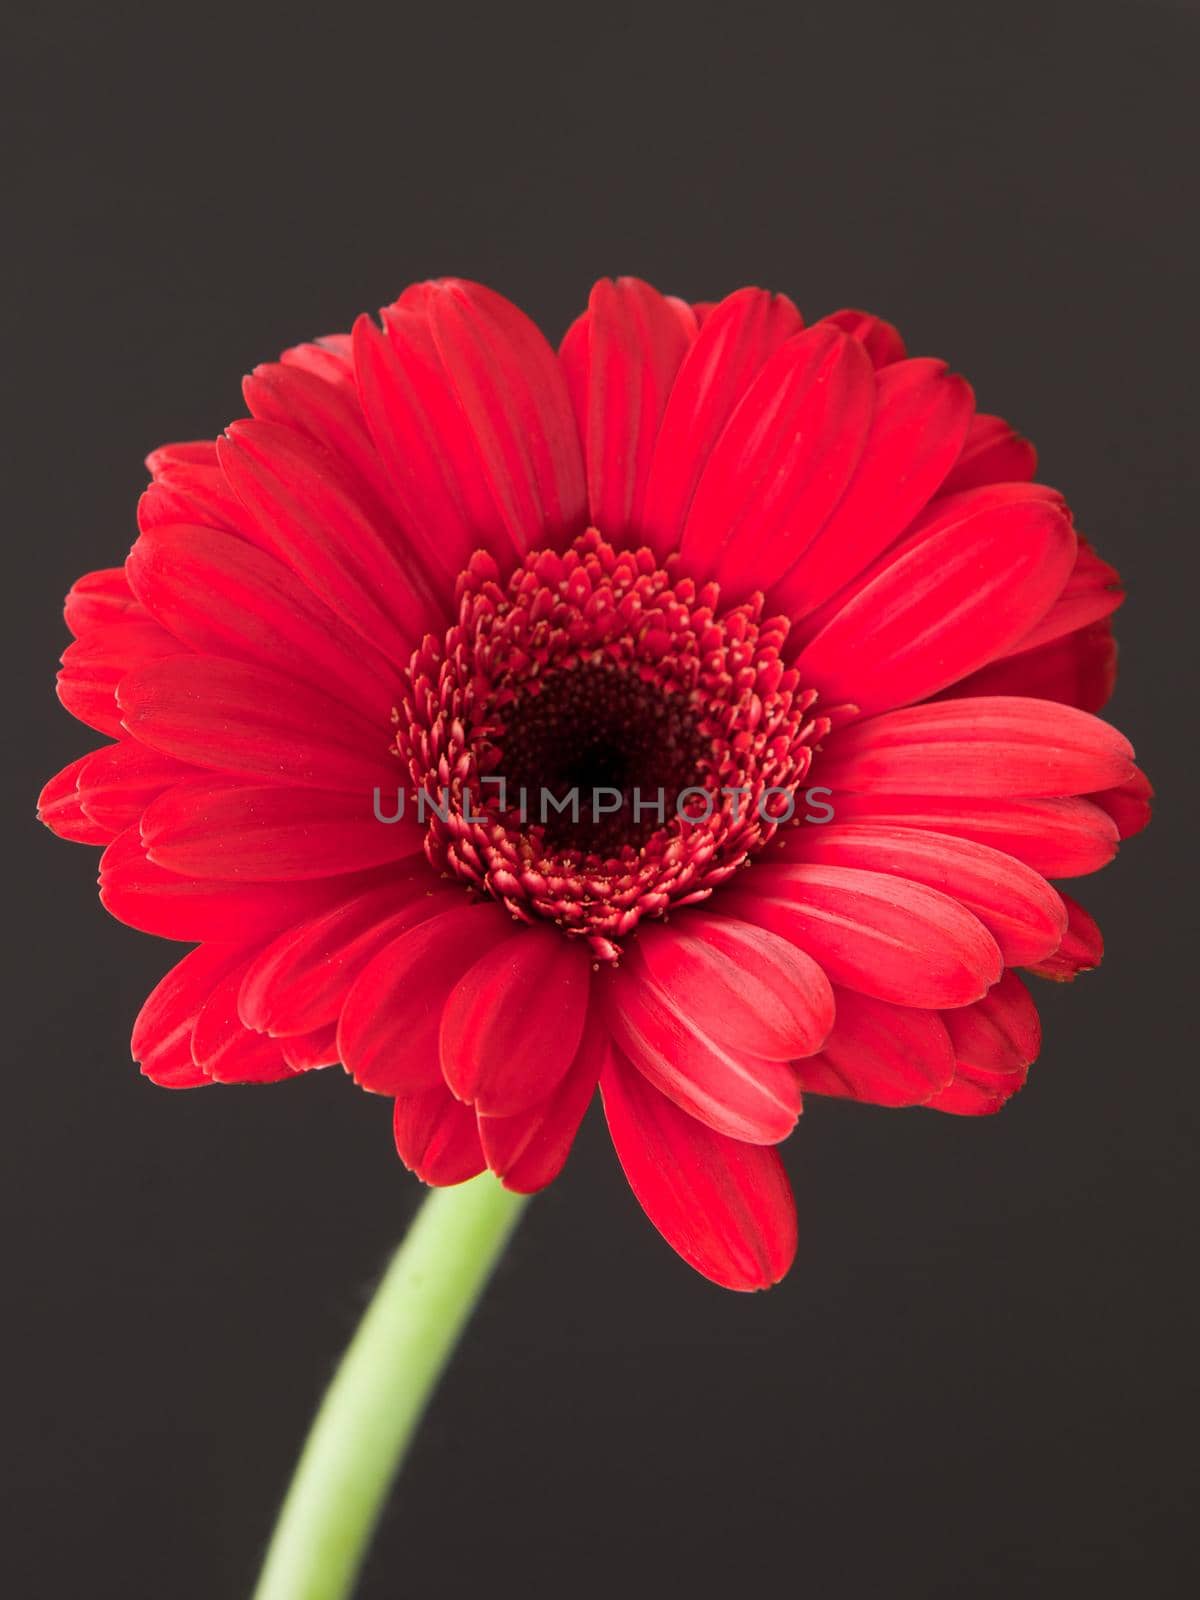 Red daisy macro petals. red gerbera flower on black background. spring floral concept